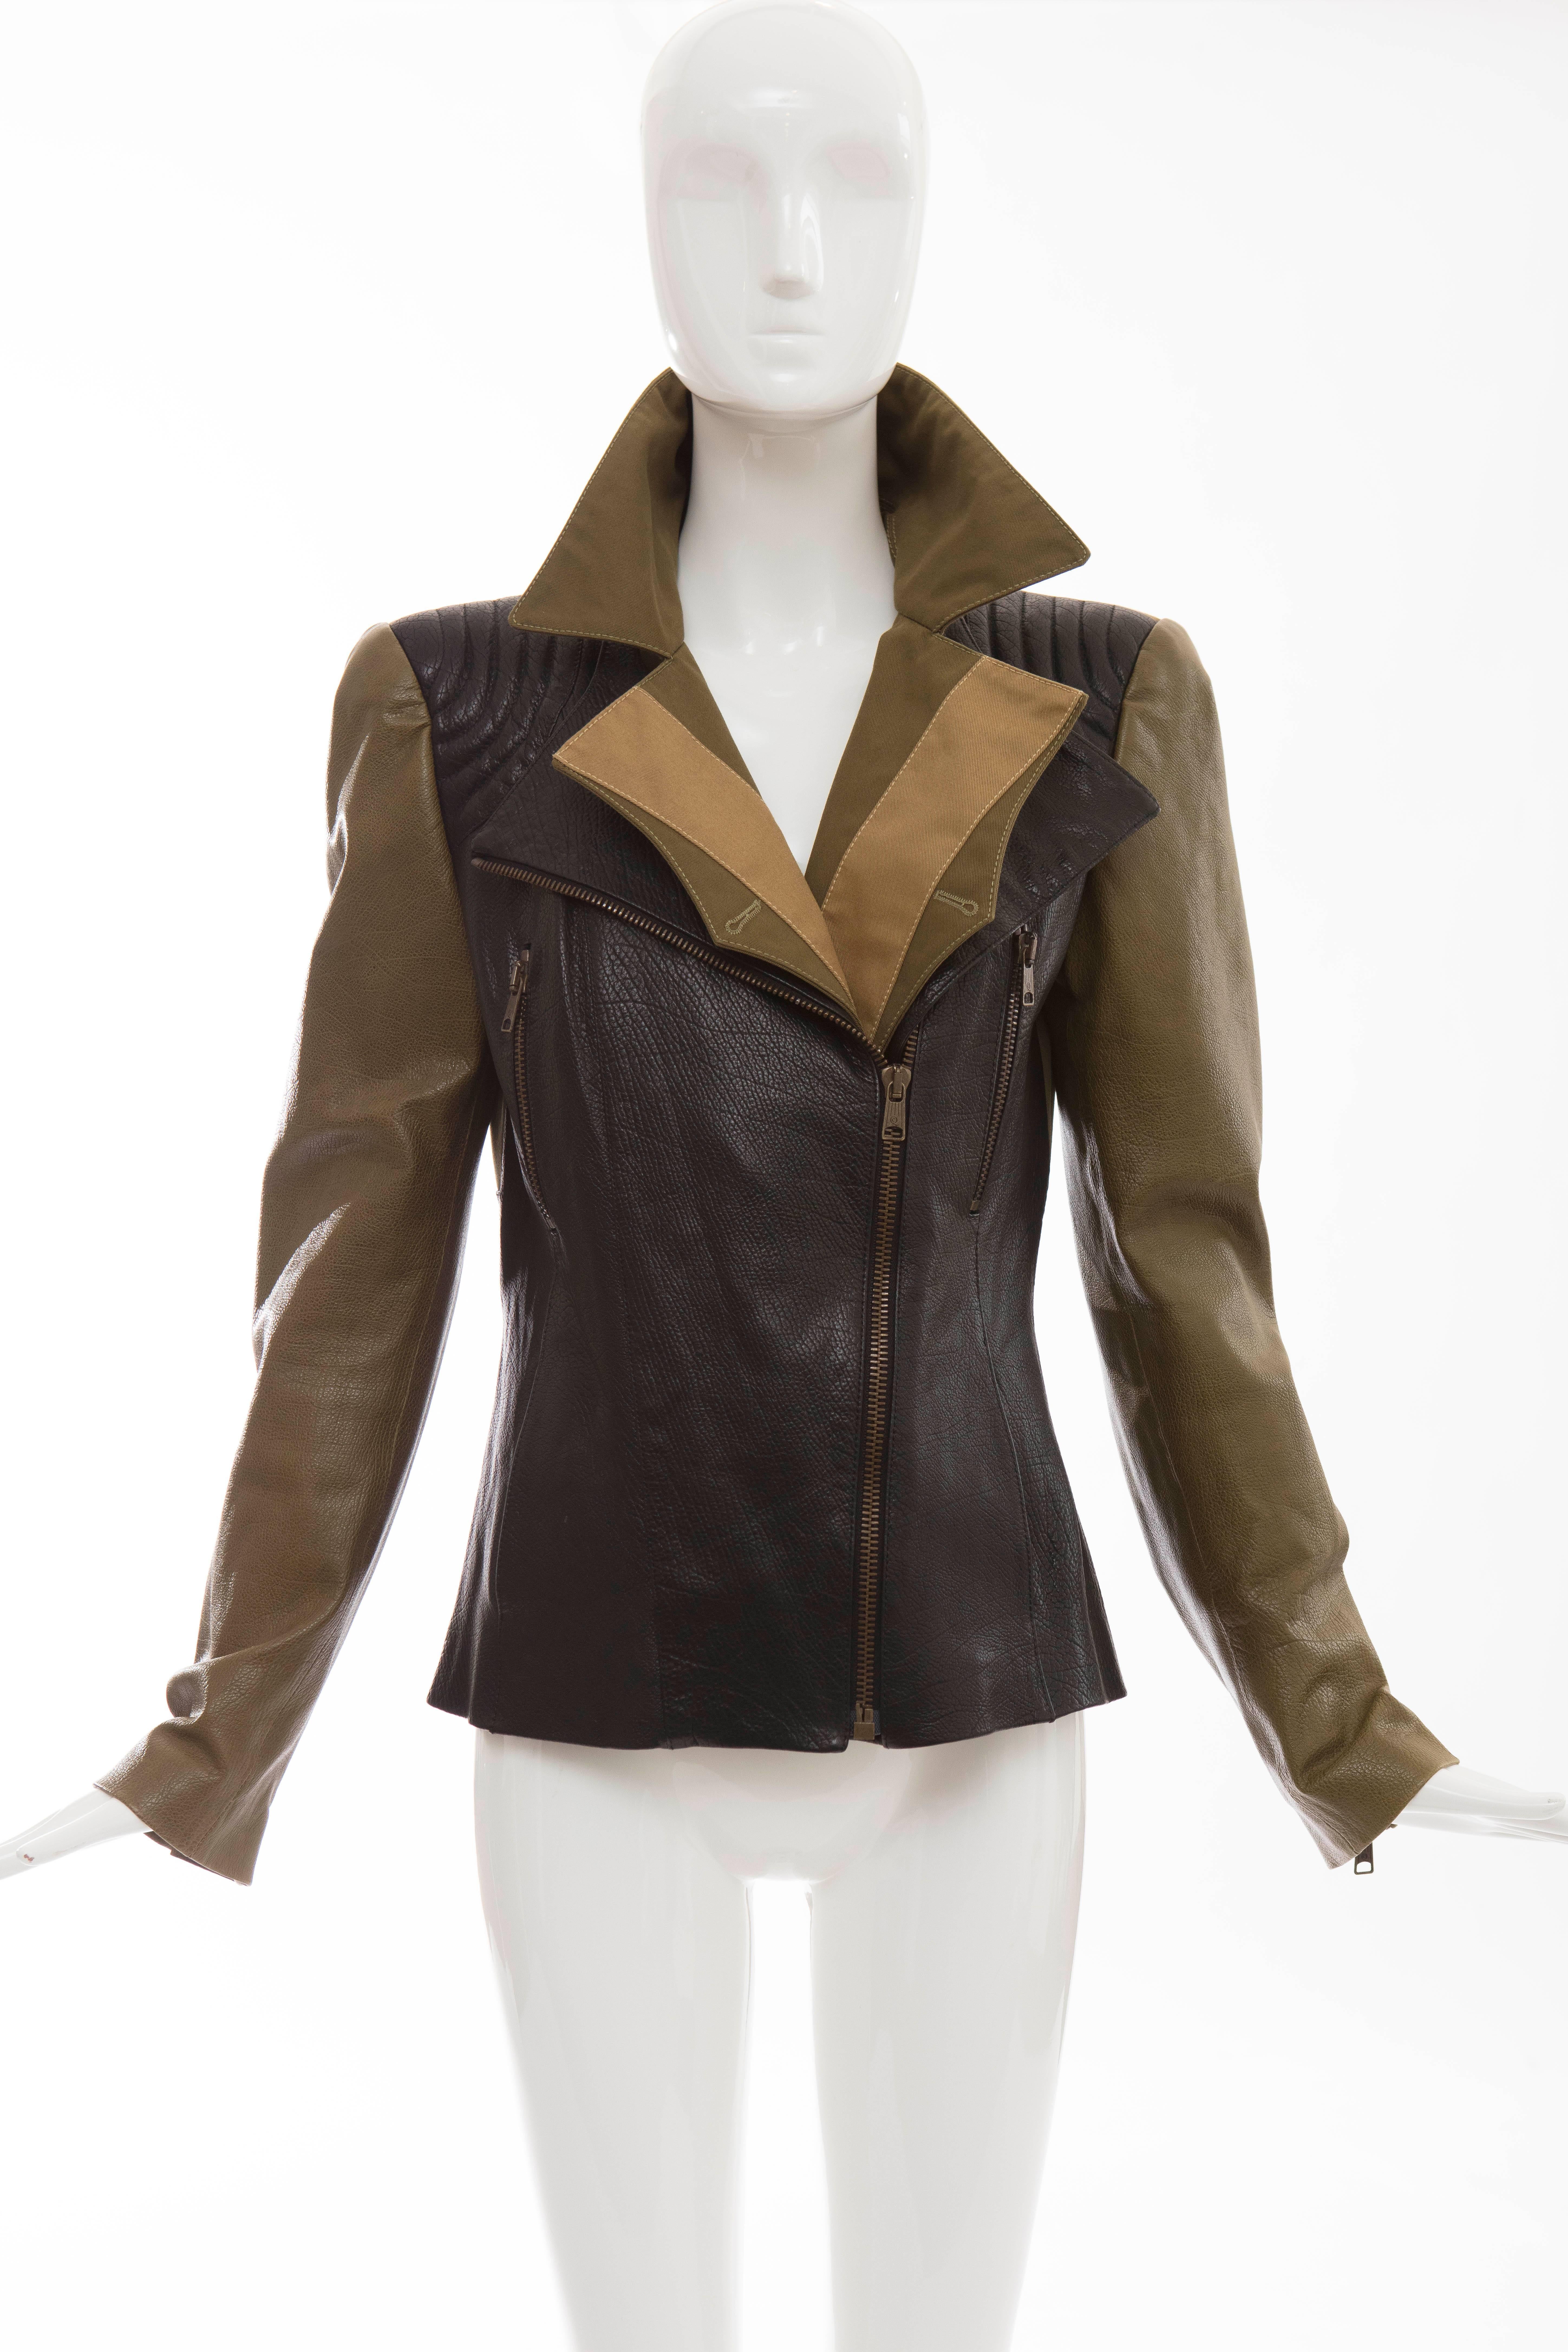 Alexander McQueen, olive green and black leather jacket, olive green cotton canvas panels, asymmetrical front zip closure, four front pockets with two zip, zip leather sleeves and silk lined.

EU. 44
US. 8

Bust 35, Waist 32, Sleeve 25, Length 23.5